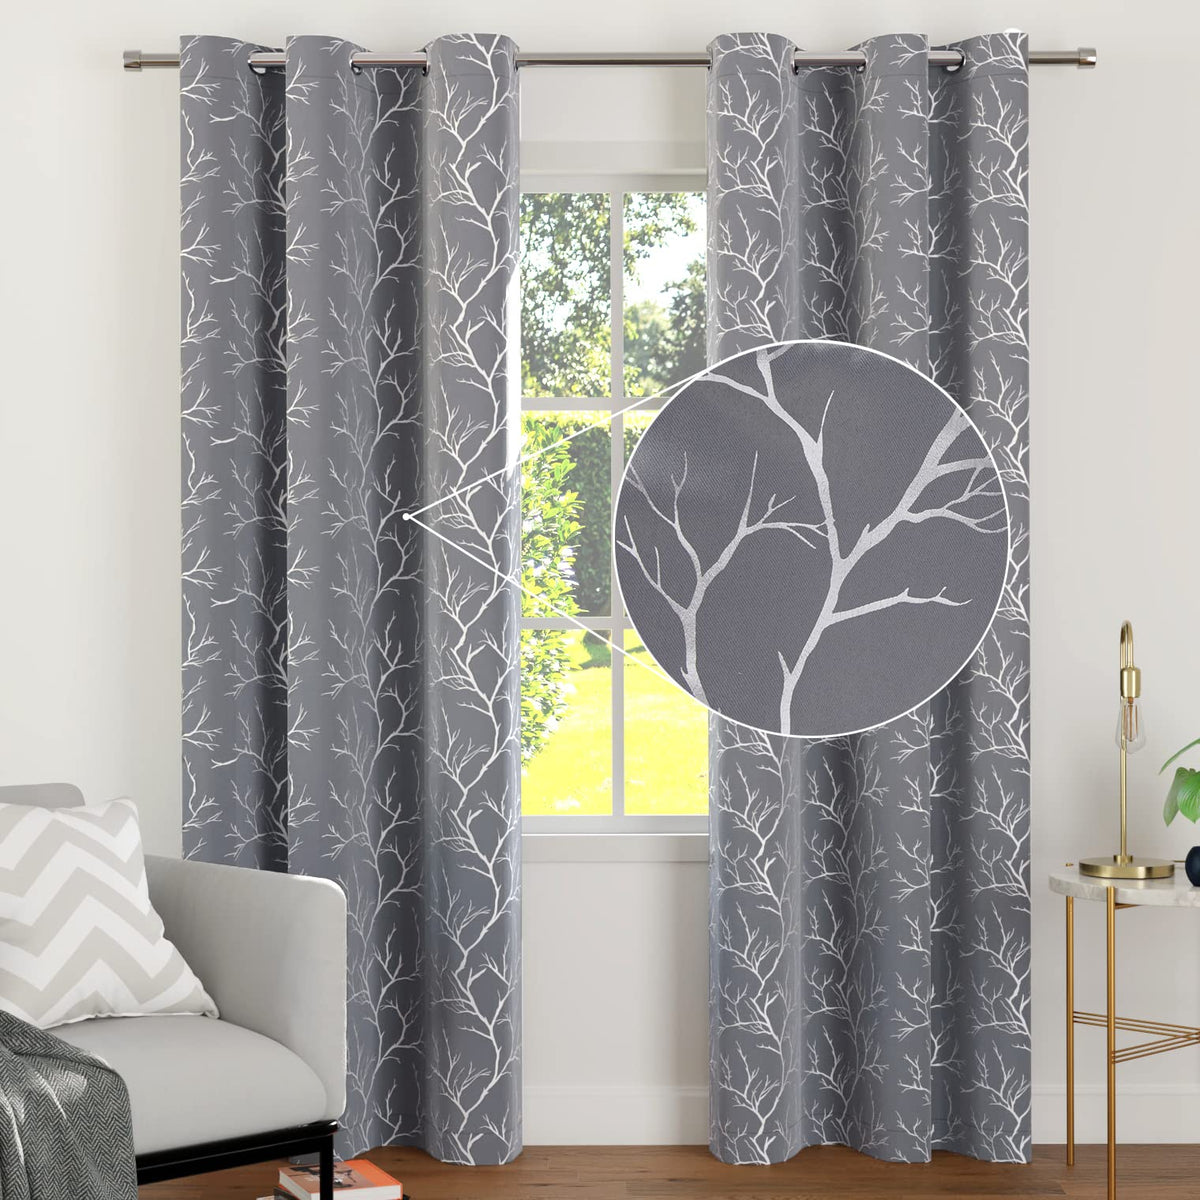 Encasa Homes Room Darkening Blackout Curtains 2 Panels Silver Foil Printed Plain Colours for Kids Bedroom, Living Room with Grommet, 85% Light Blocking, Sound & Heat Reducing, 7 ft -Twigs Grey